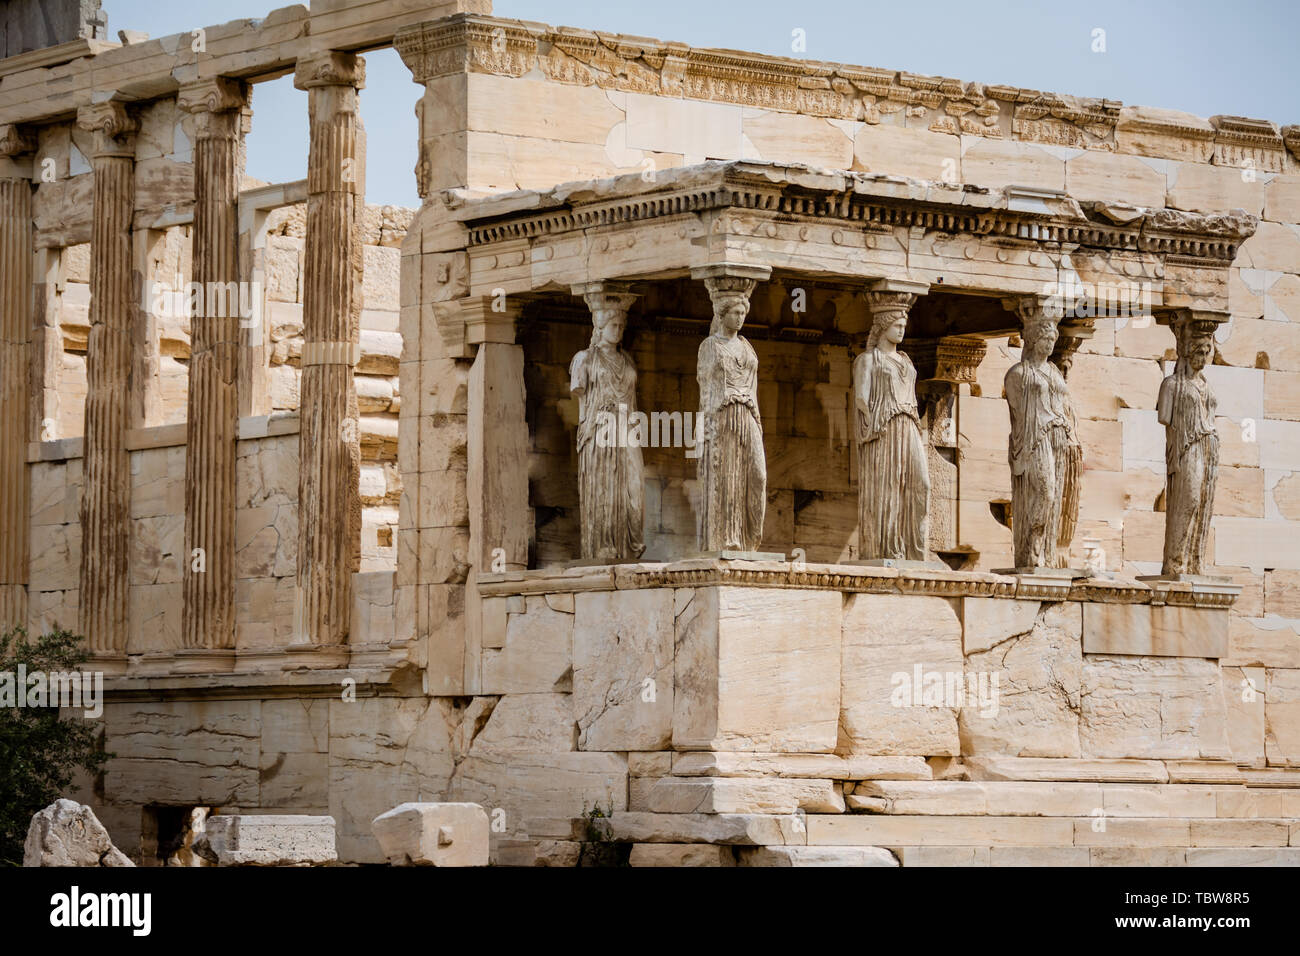 temples ruins of Ancient Greece civilization Stock Photo